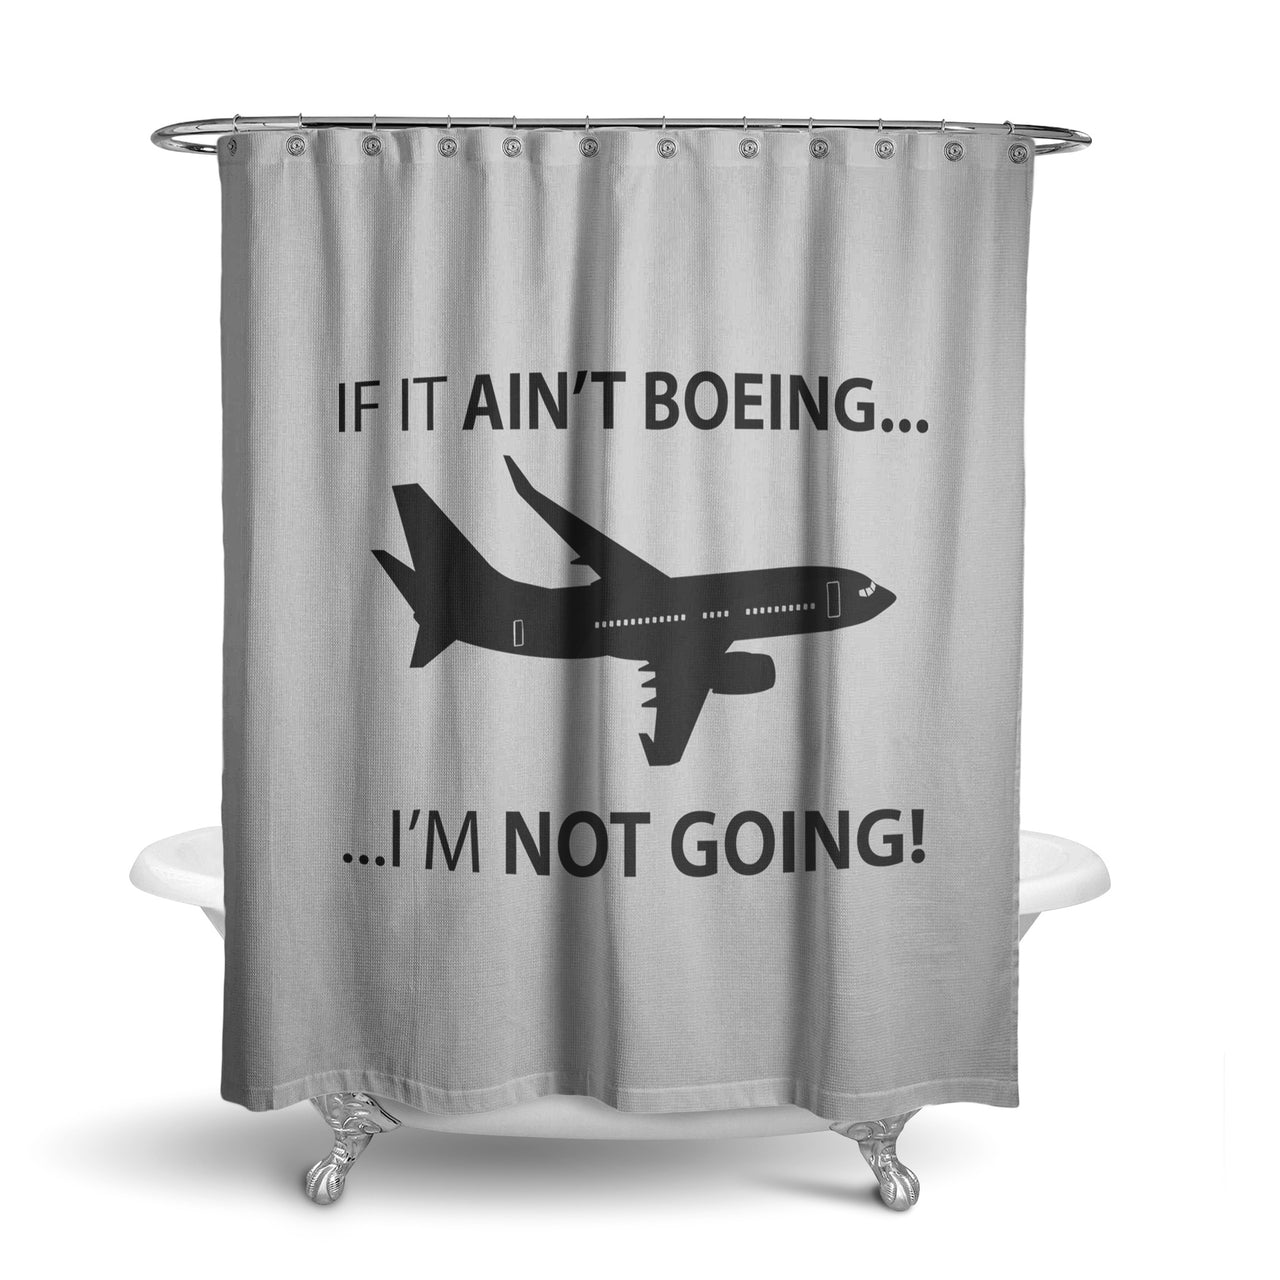 If It Ain't Boeing I'm Not Going! Designed Shower Curtains